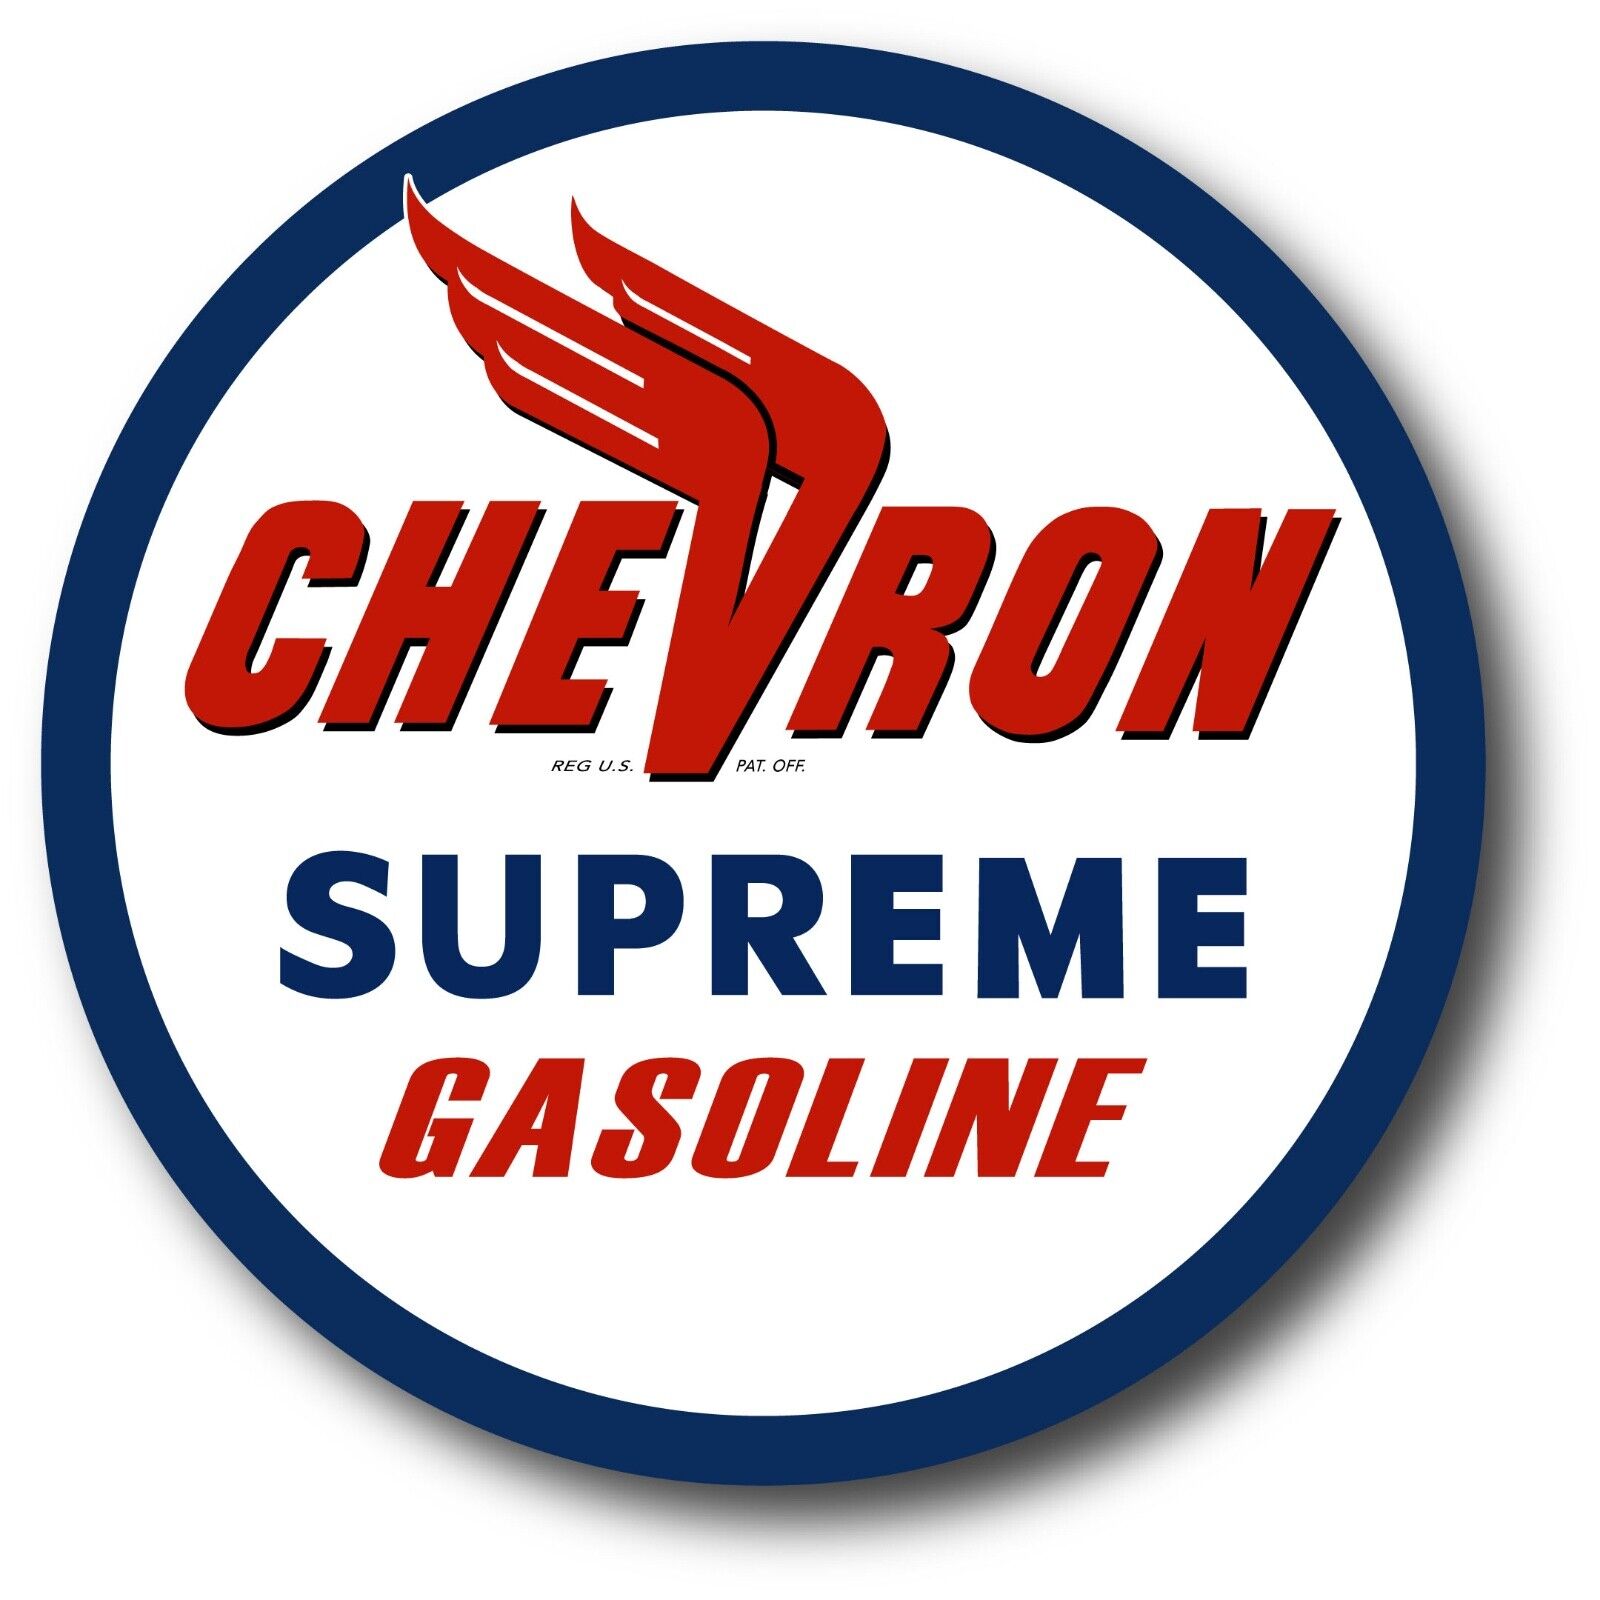 Chevron Vintage Decals Stickers Racing Gasoline Oil Vintage Reproduction Decal